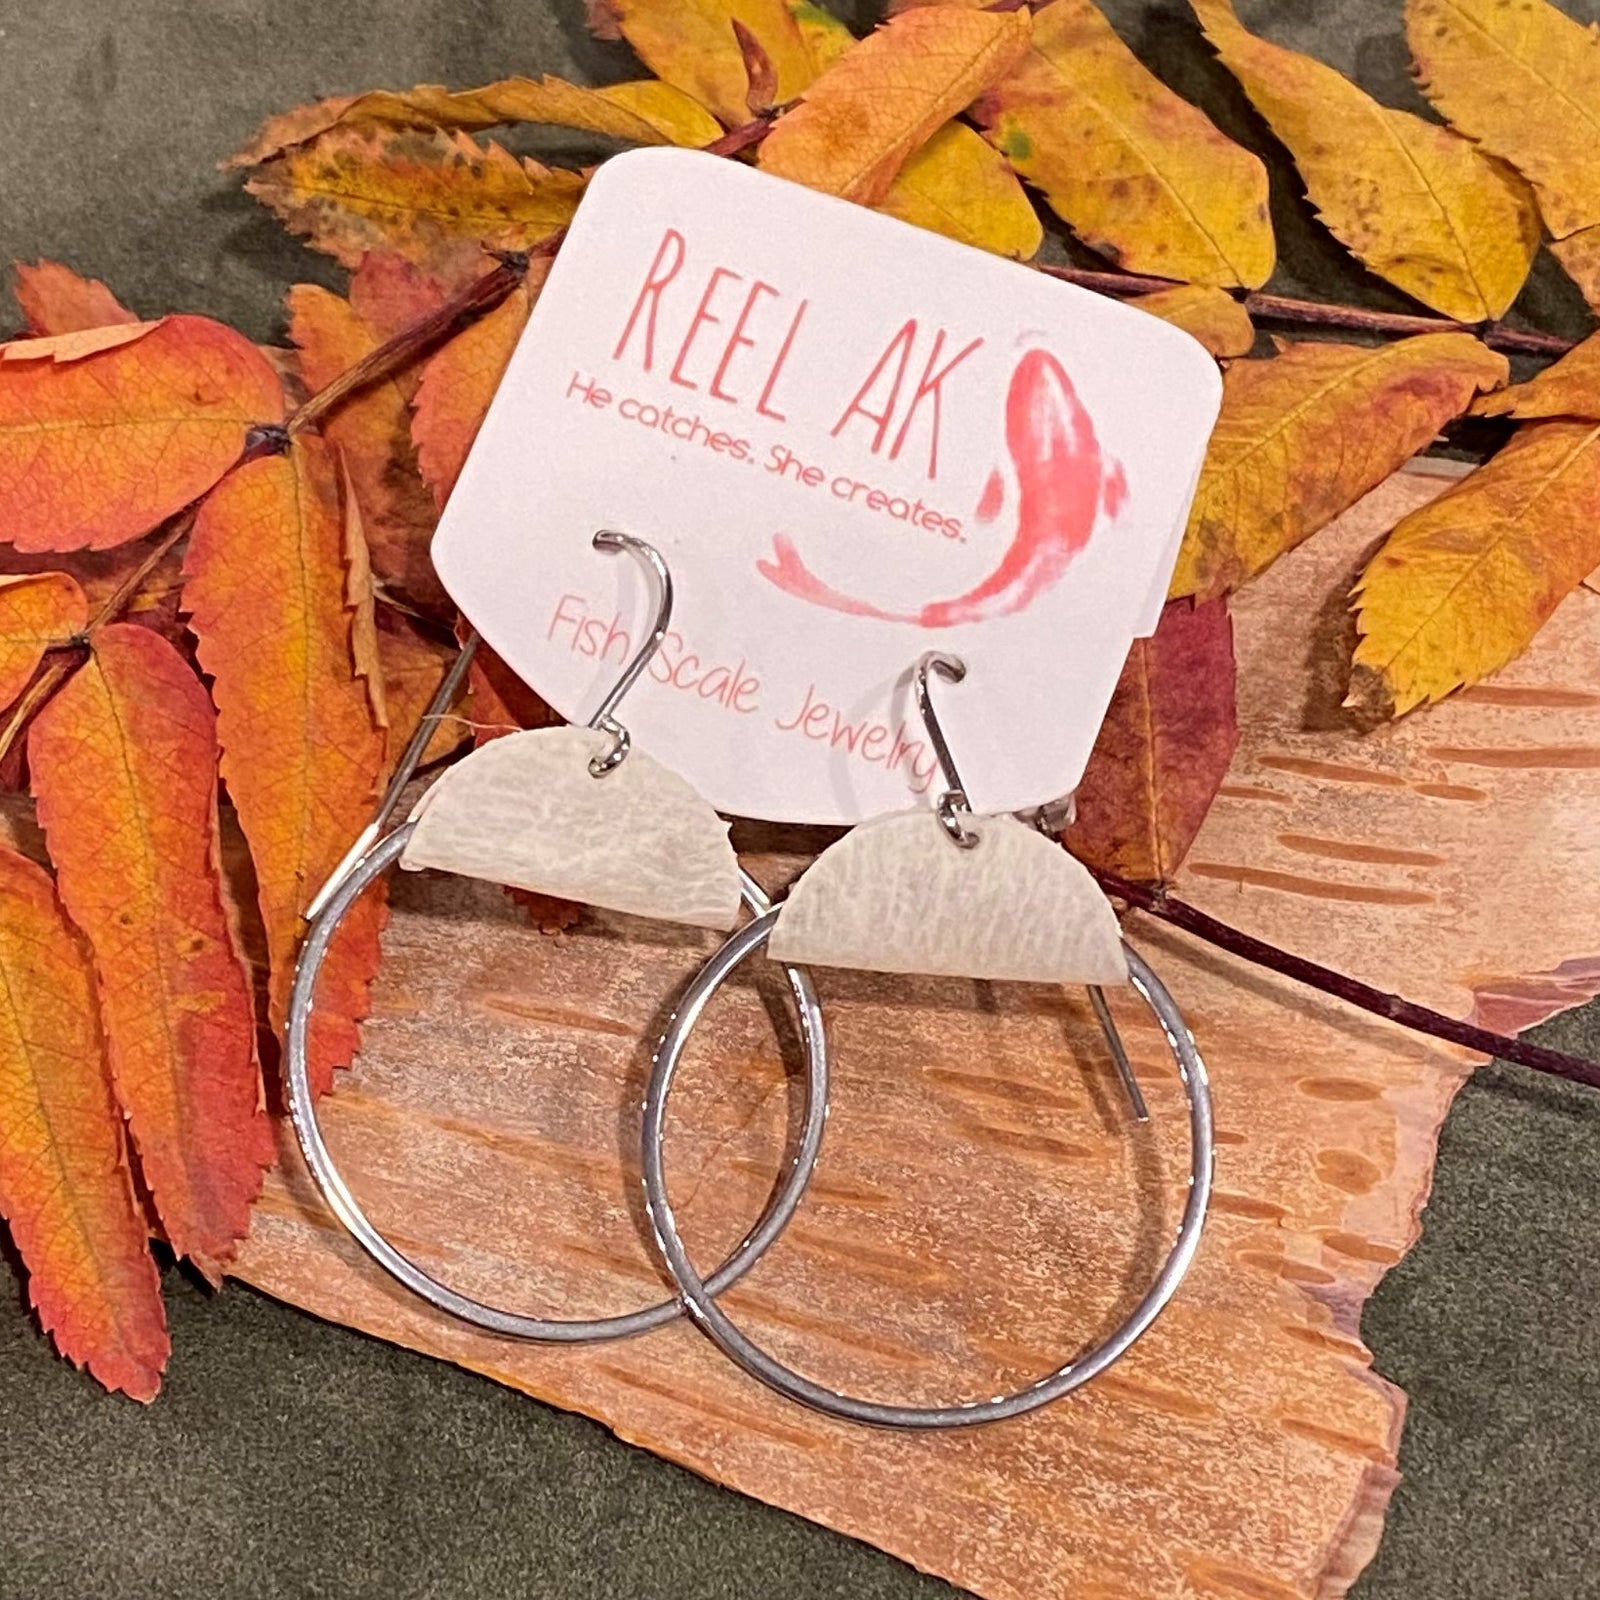 Reel AK Jewelry - Forests, Tides, and Treasures